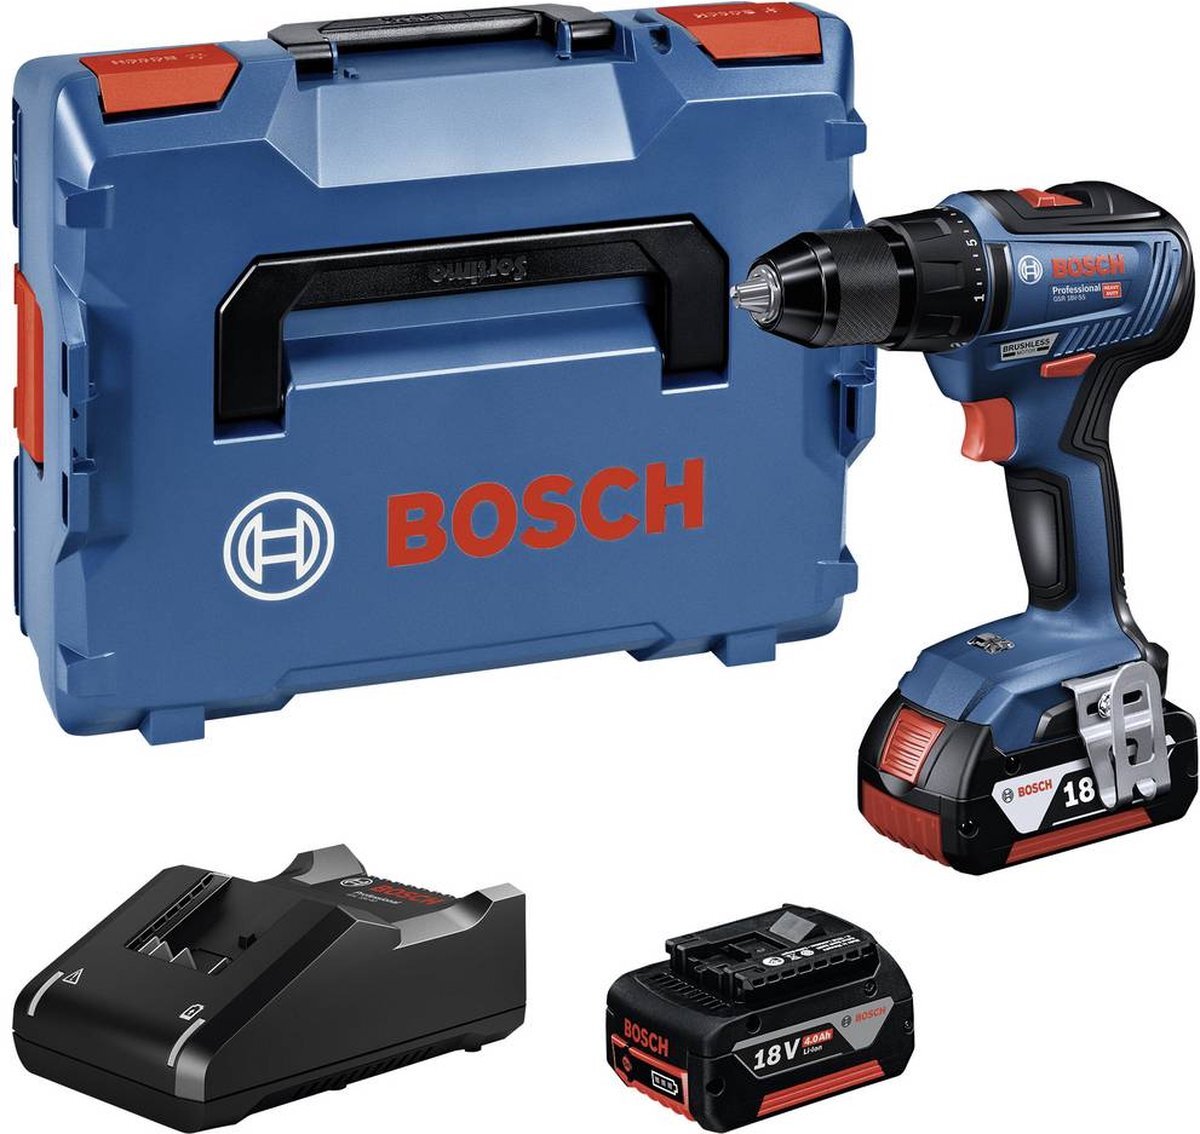 Bosch GSR 18V-55 06019H5200 Accu-schroefboormachine 18 V 4.0 Ah Li-ion Brushless, Incl. 2 accus, Incl. lader, Incl. koffer